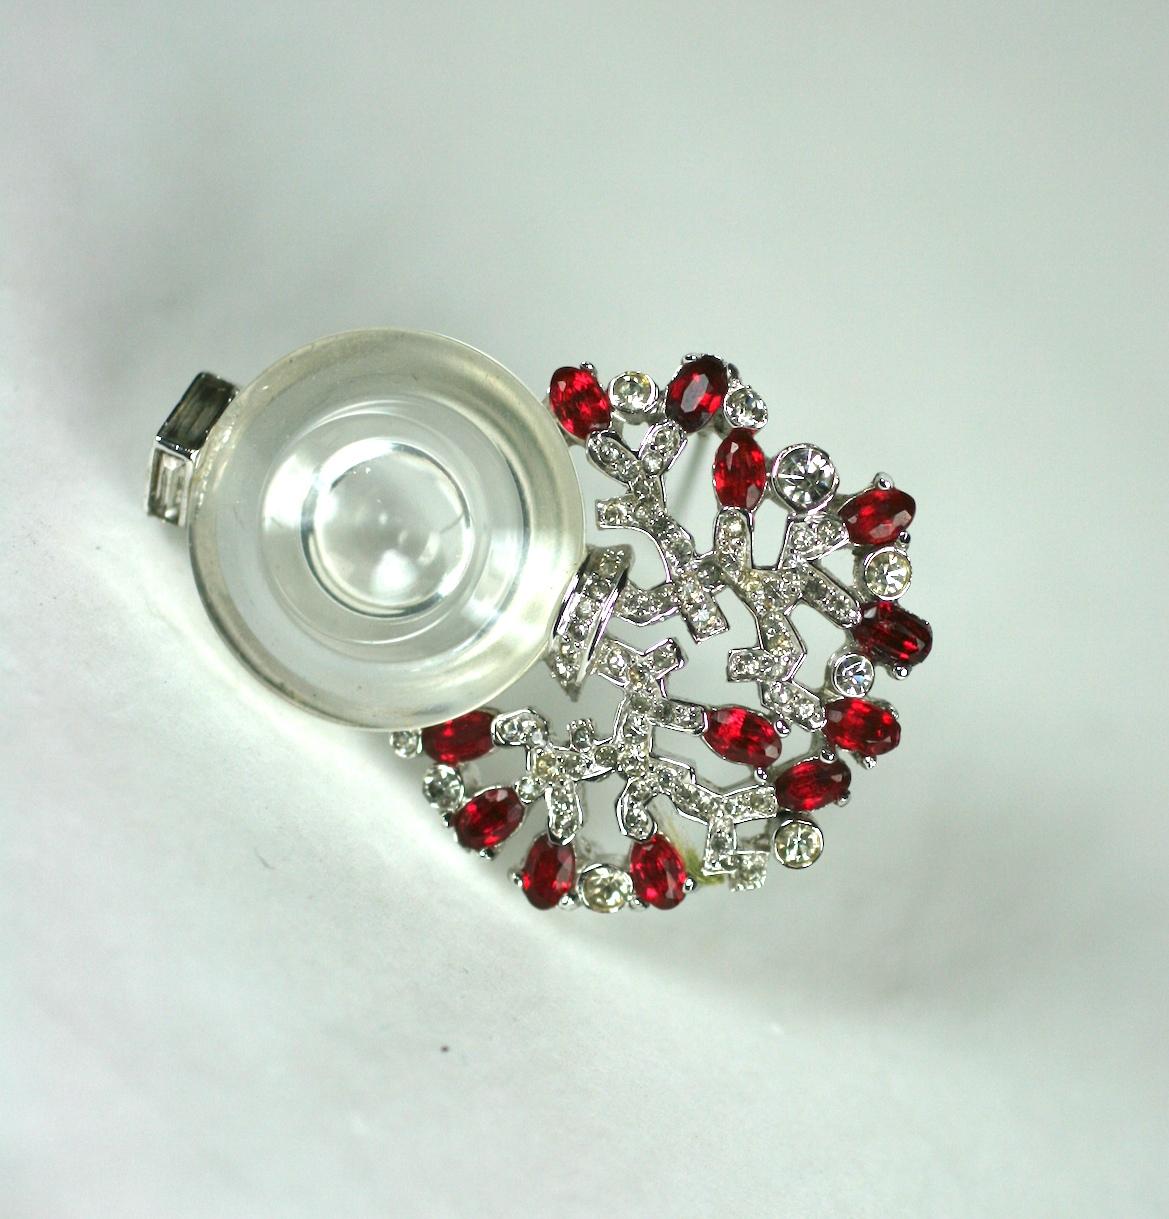 Marcel Boucher Art Deco Crystal Vase Brooch In Excellent Condition For Sale In New York, NY